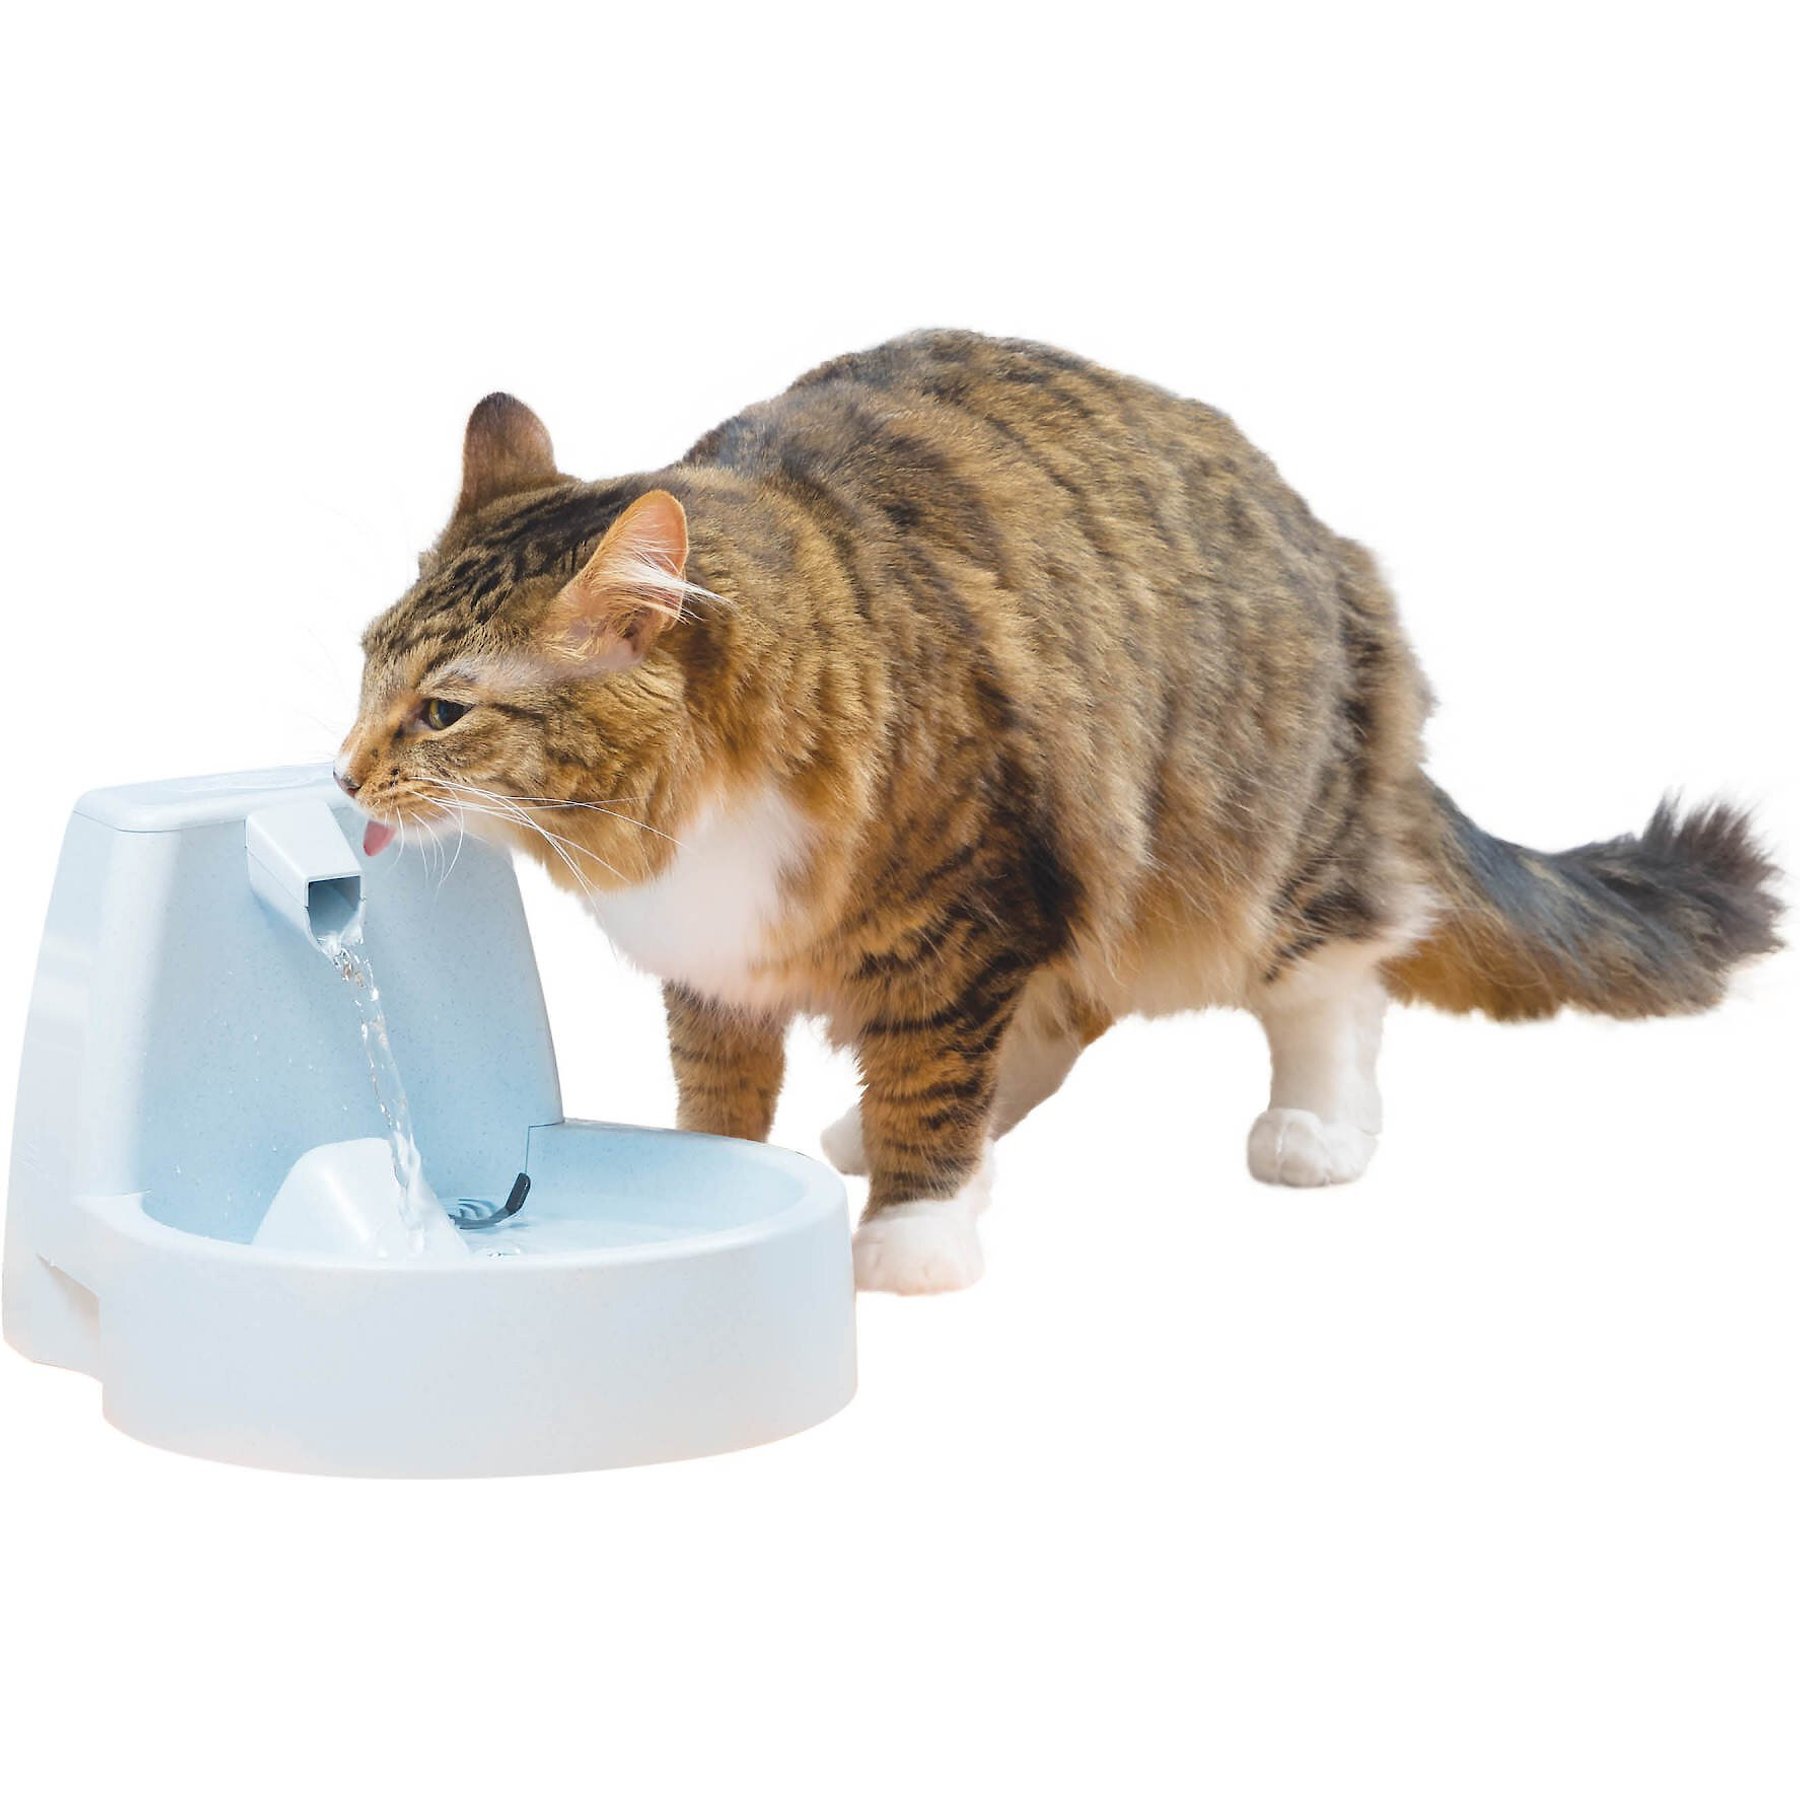 Electric Dog Water Bowl Dispenser - Large Automatic Slow Refilling Pet Water Fountain with Adjustable Pump, Keeps Water Fresh for Cats & Dogs